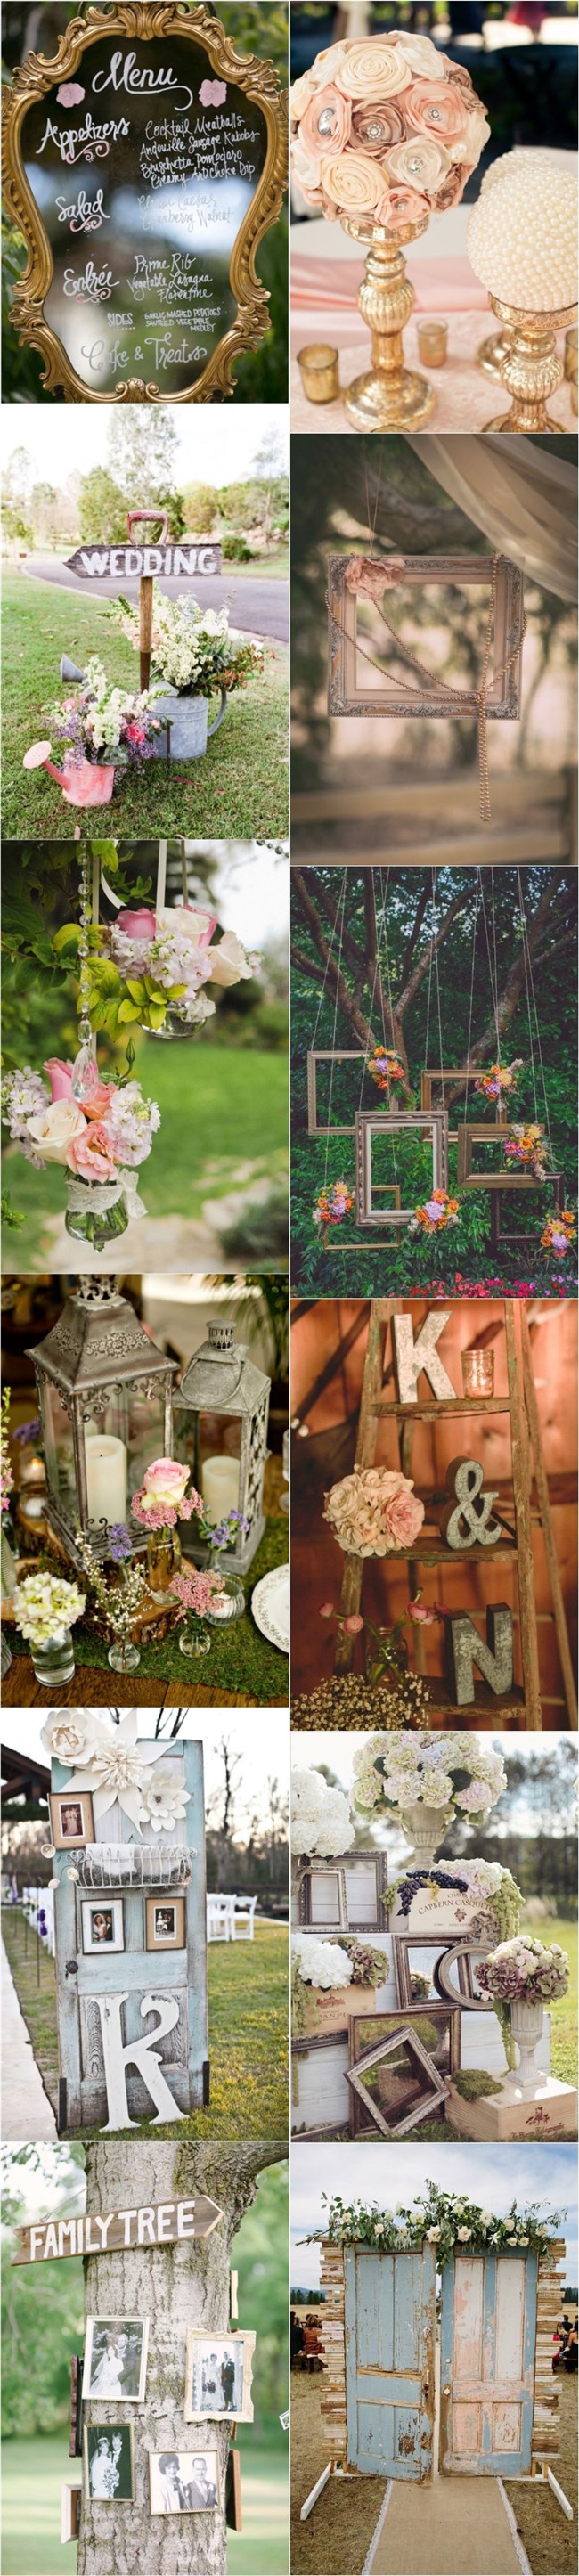 rustic and vintage wedding decorations